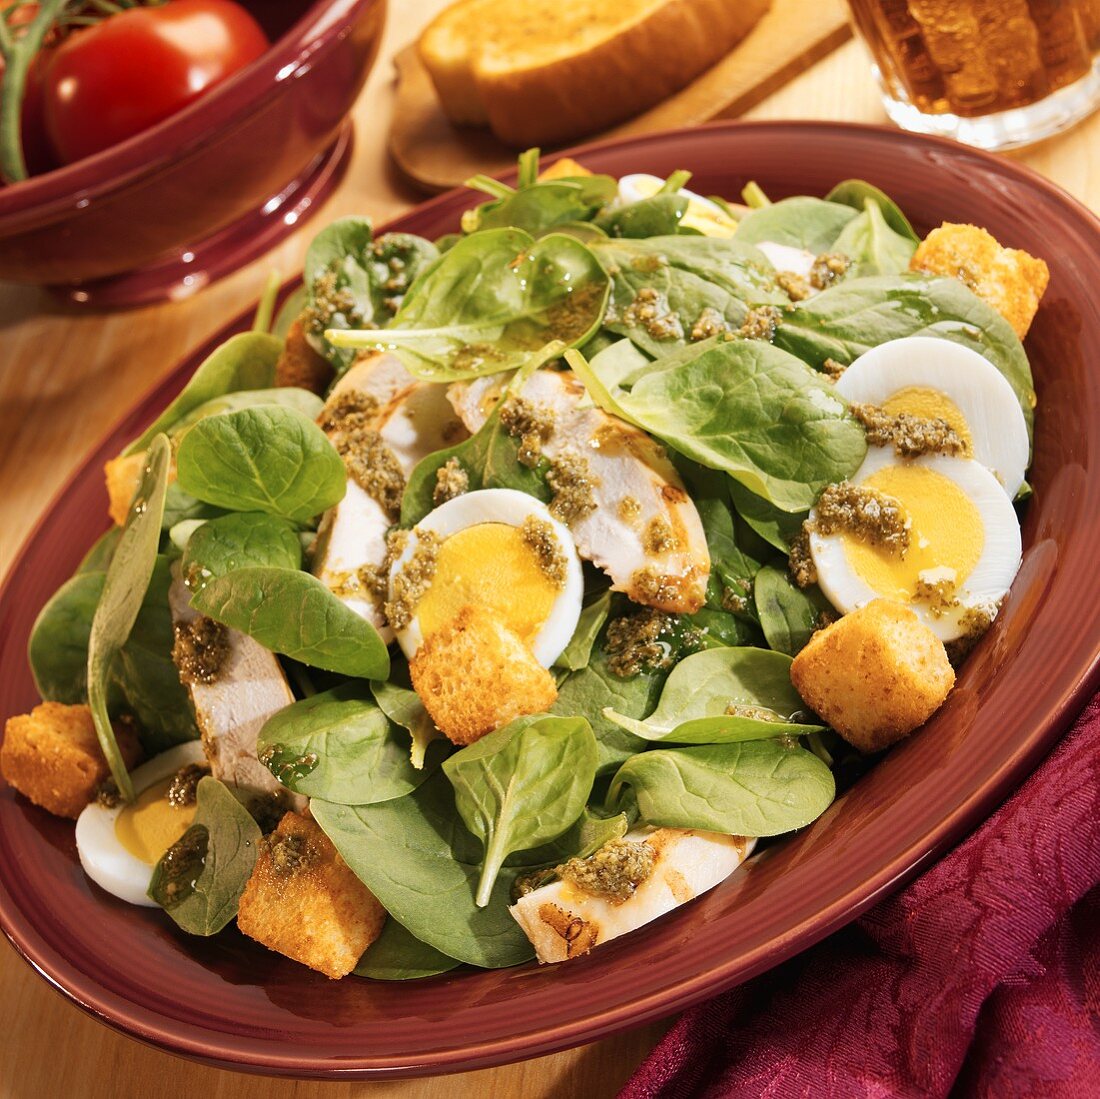 Spinach salad with chicken, egg, croutons and pesto